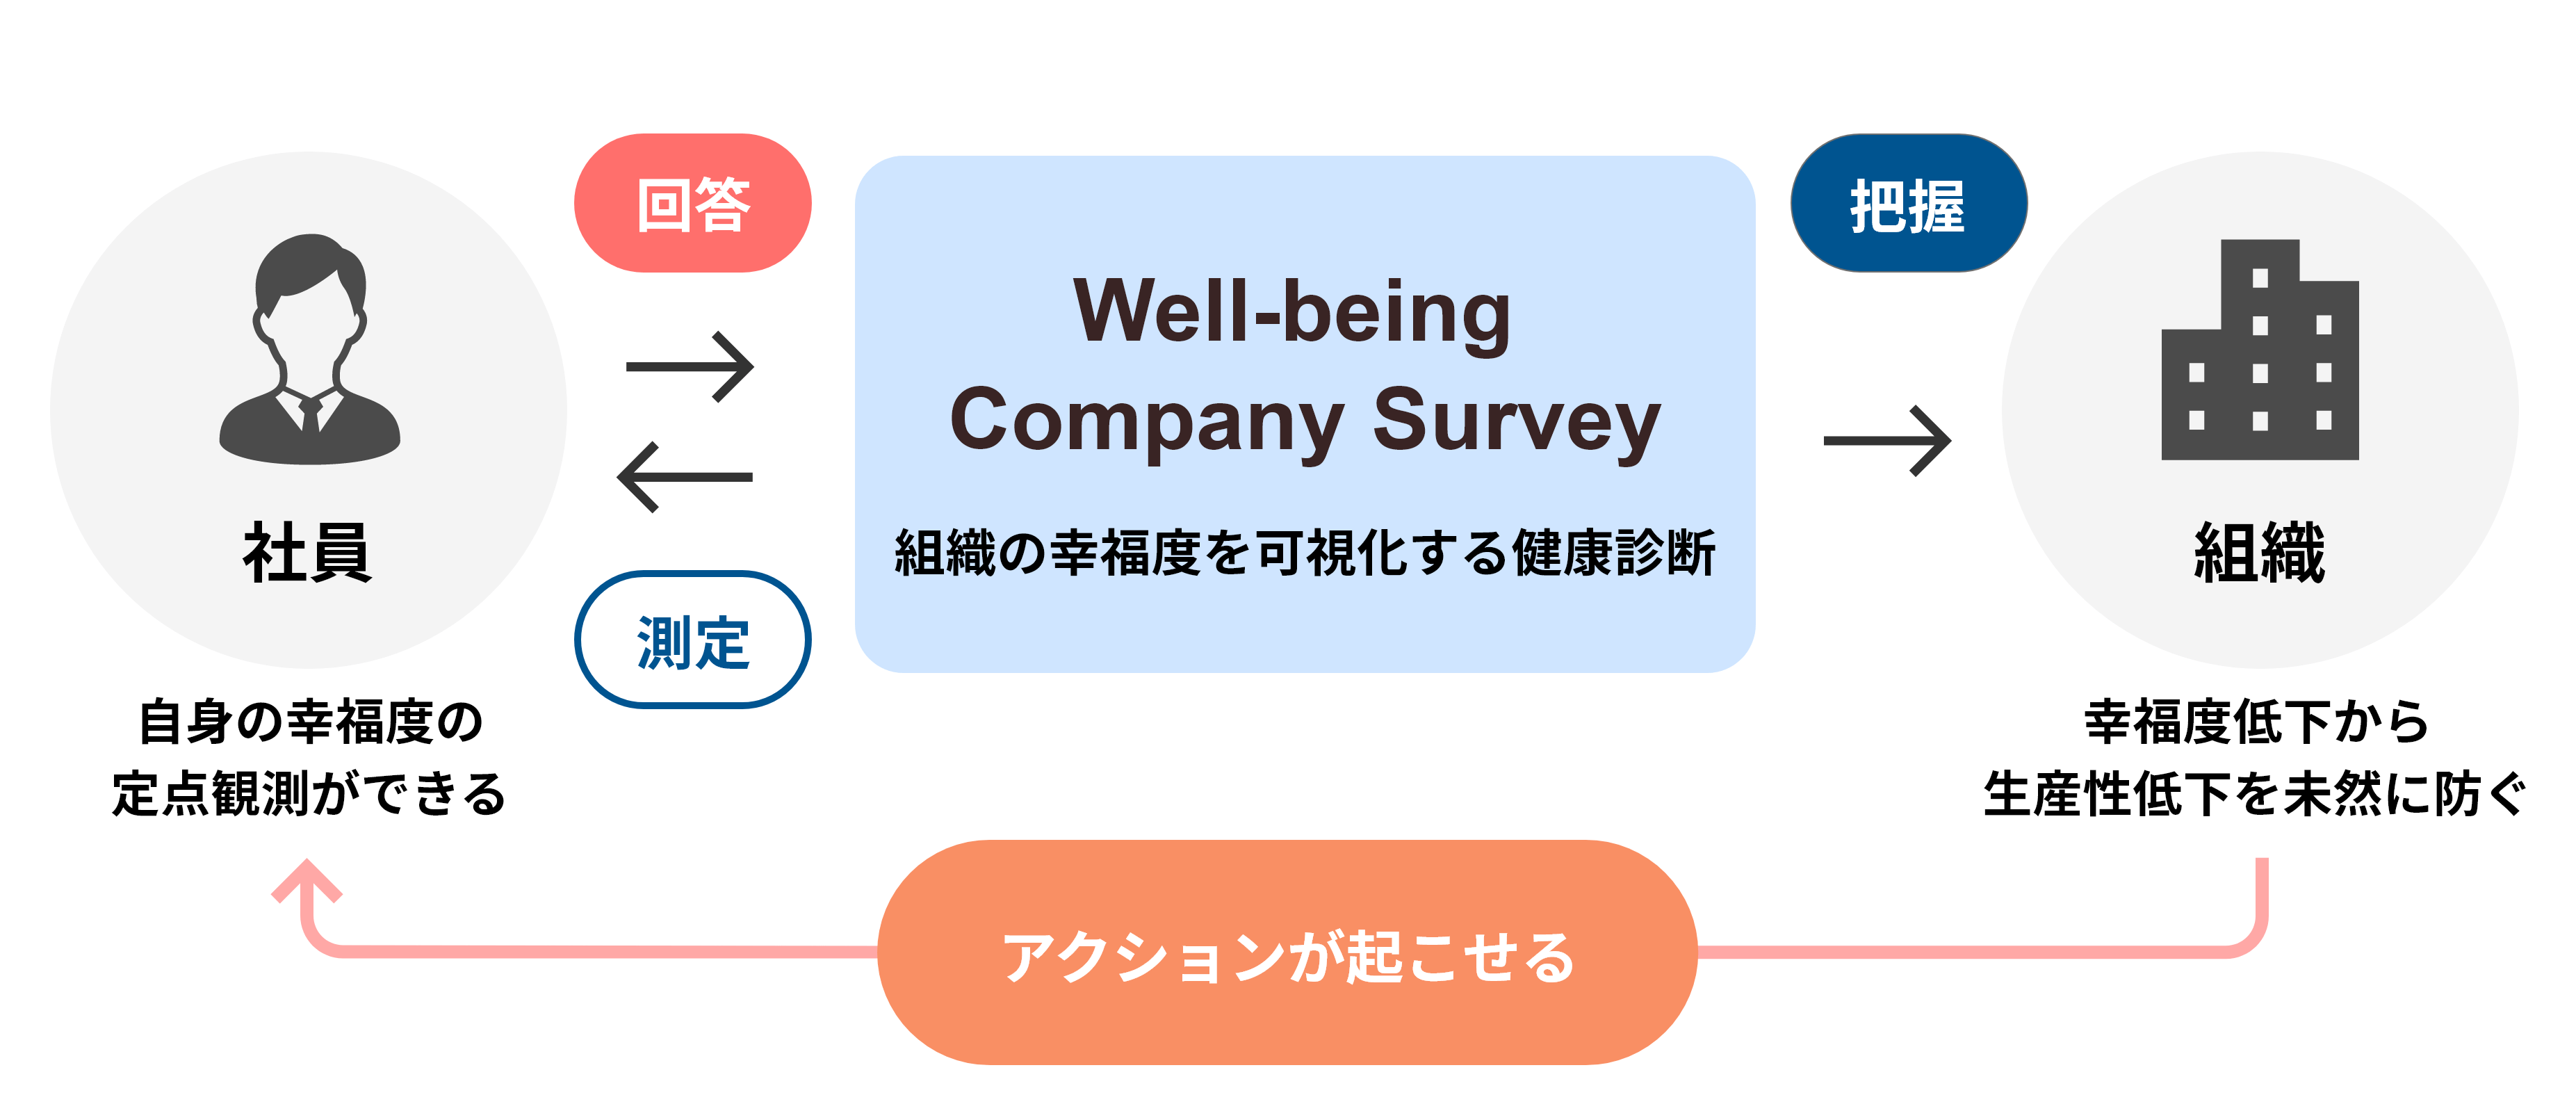 Well-being Company Survey（WCS）とは